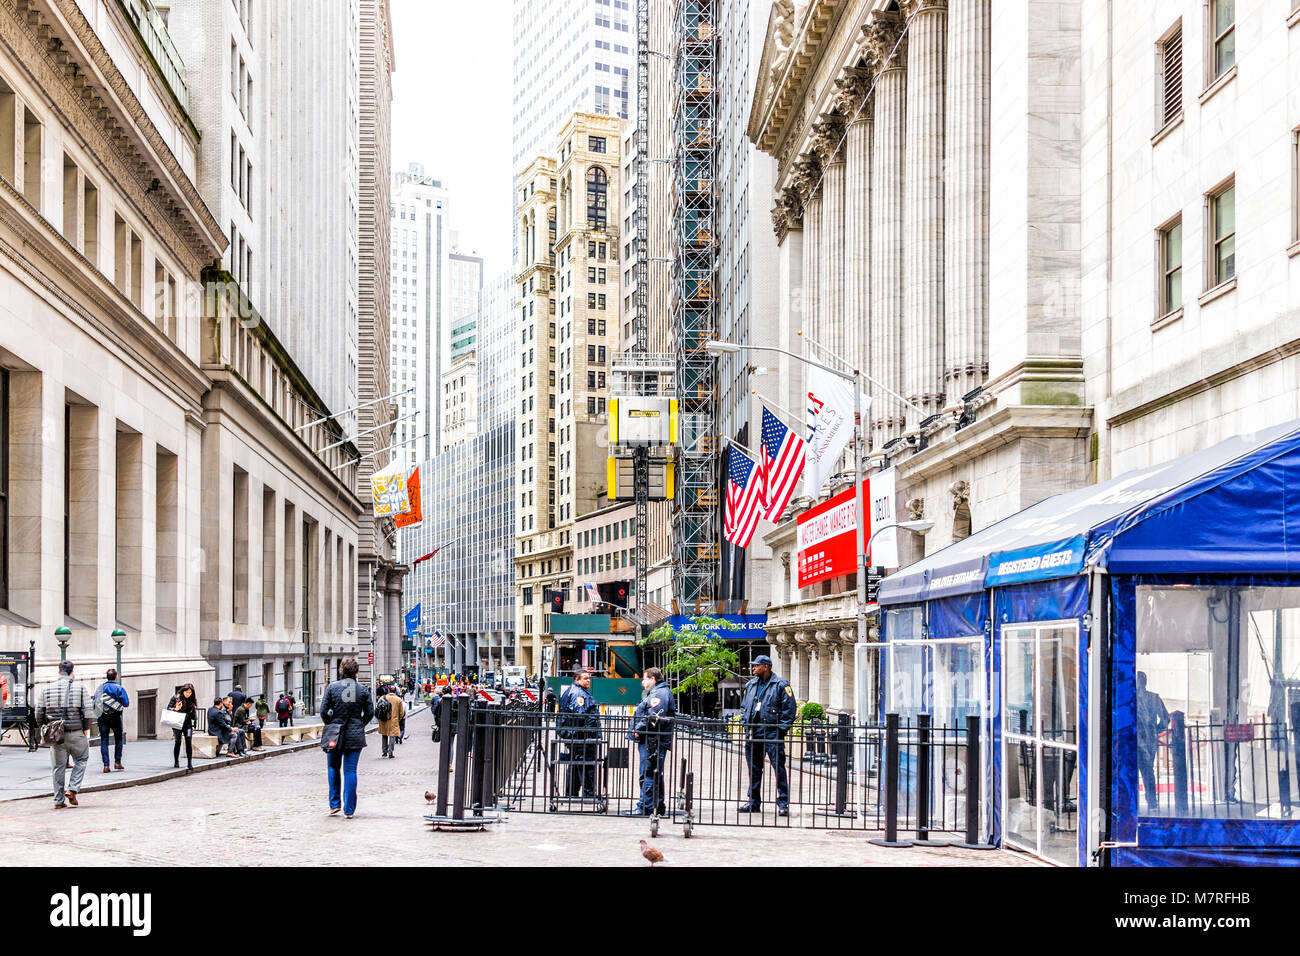 New York City, USA - October 30, 2017: Wall street, NYSE stock exchange building entrance, security, police guards, railing in NYC Manhattan lower fin Stock Photo